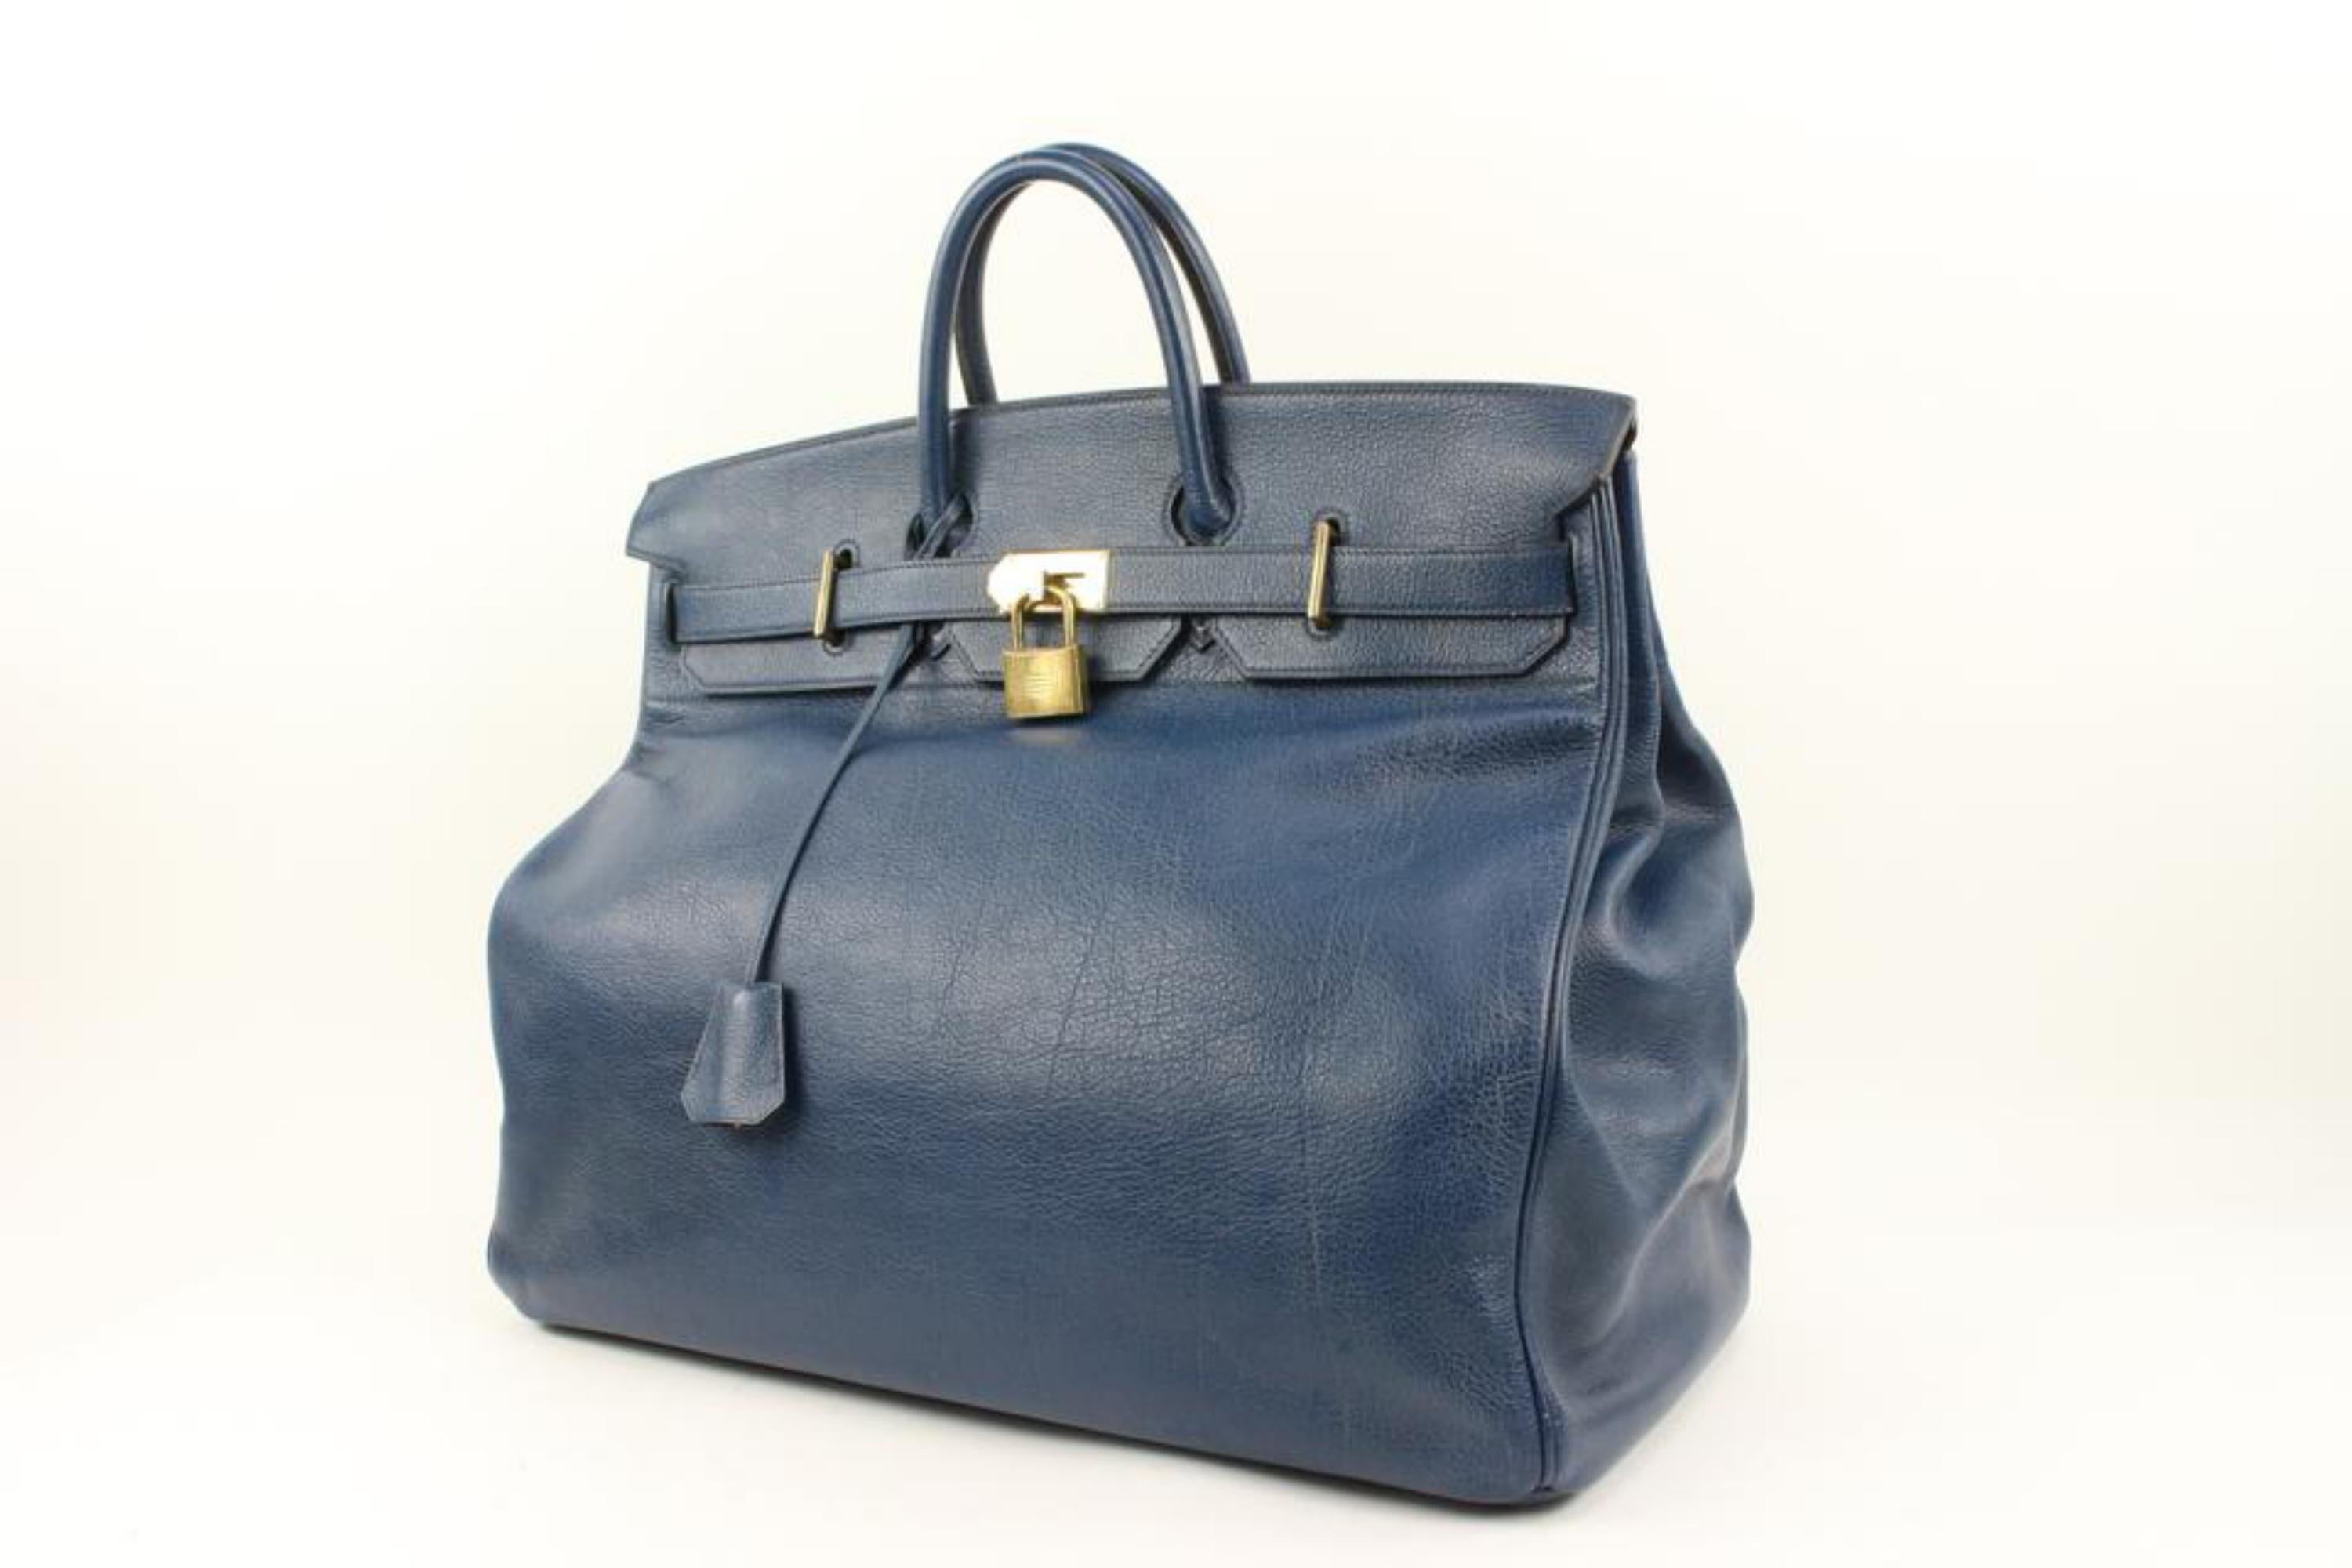 Hermès Navy Blue Buffle Skipper Haut A Courroies 50 Travel Birkin HAC 72h24s
Date Code/Serial Number: X in a circle
Made In: France
Measurements: Length:  19.5